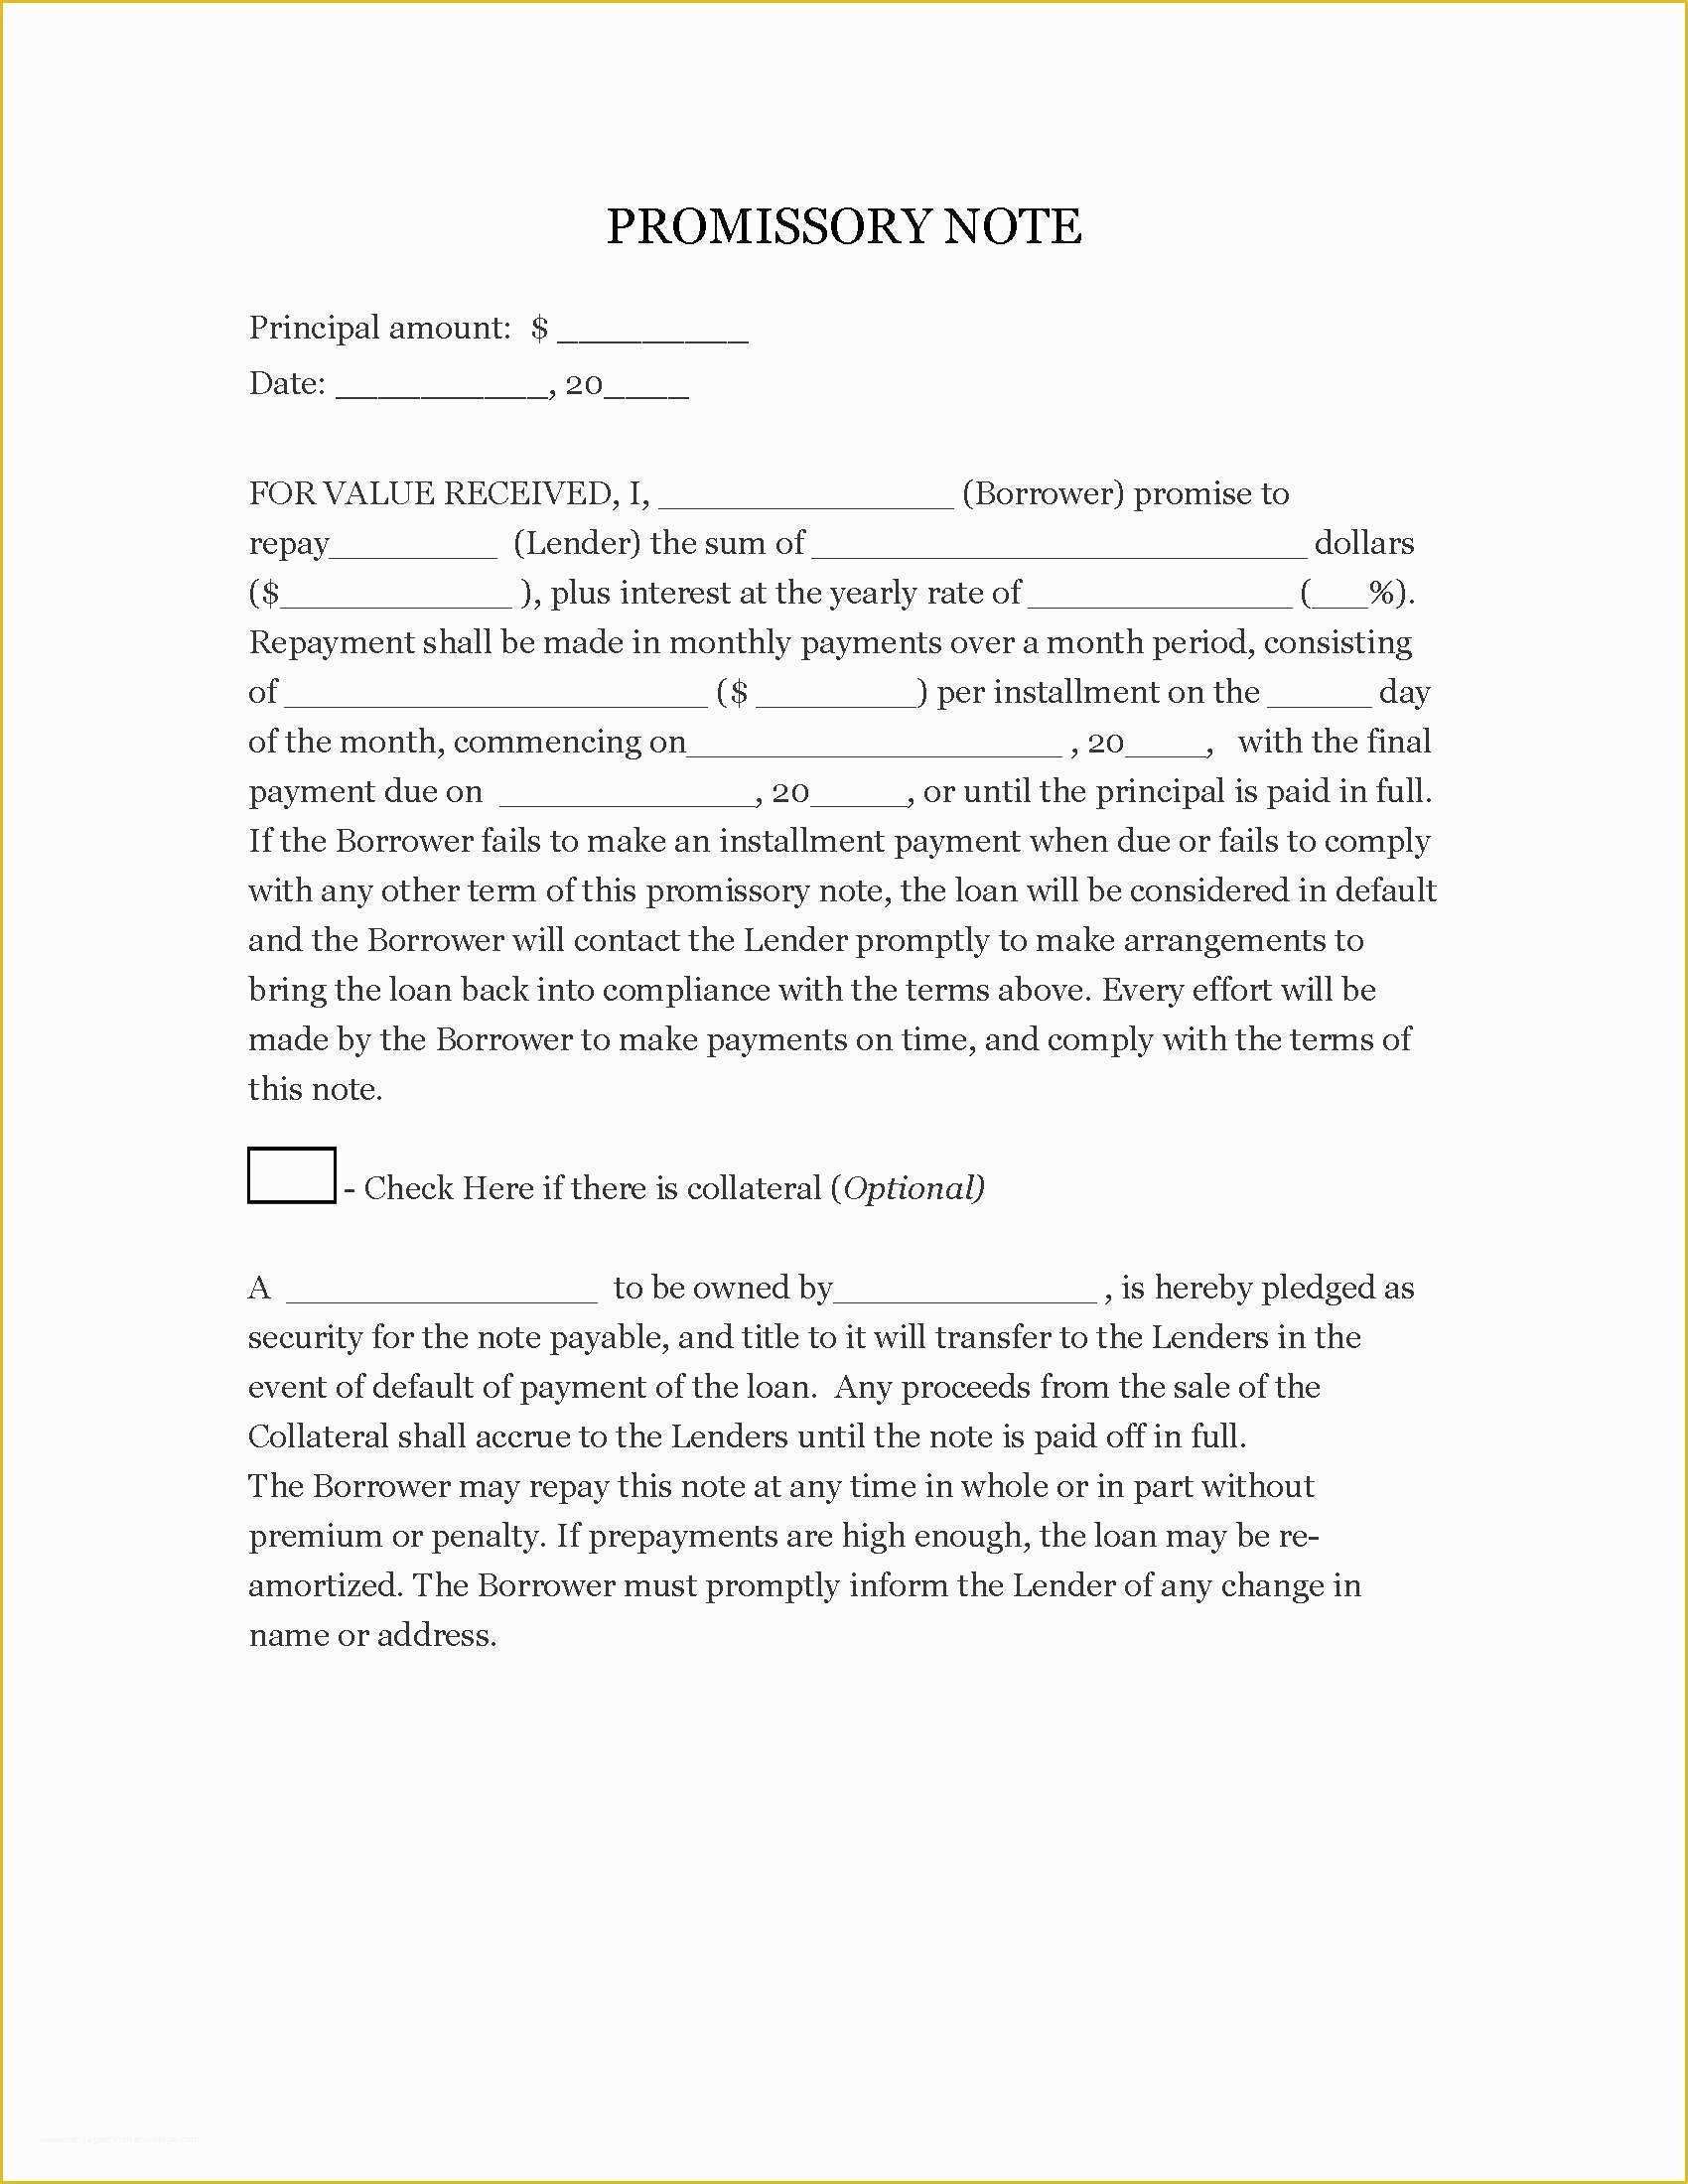 Florida Promissory Note Template Free Of Printable Promissory Note Bamboodownunder